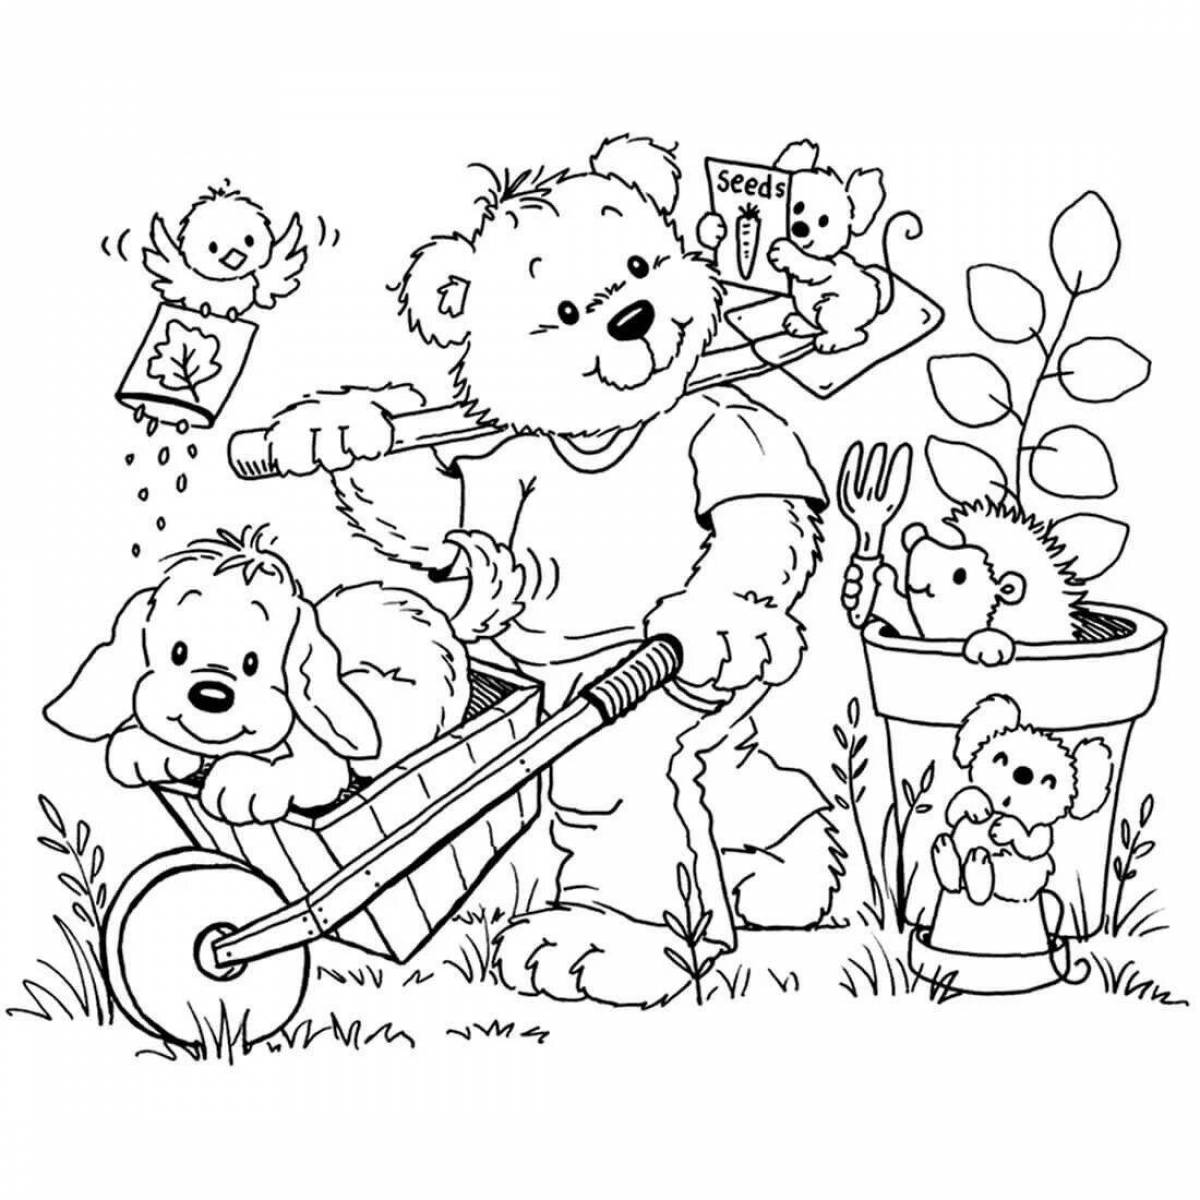 Fancy bear coloring pages